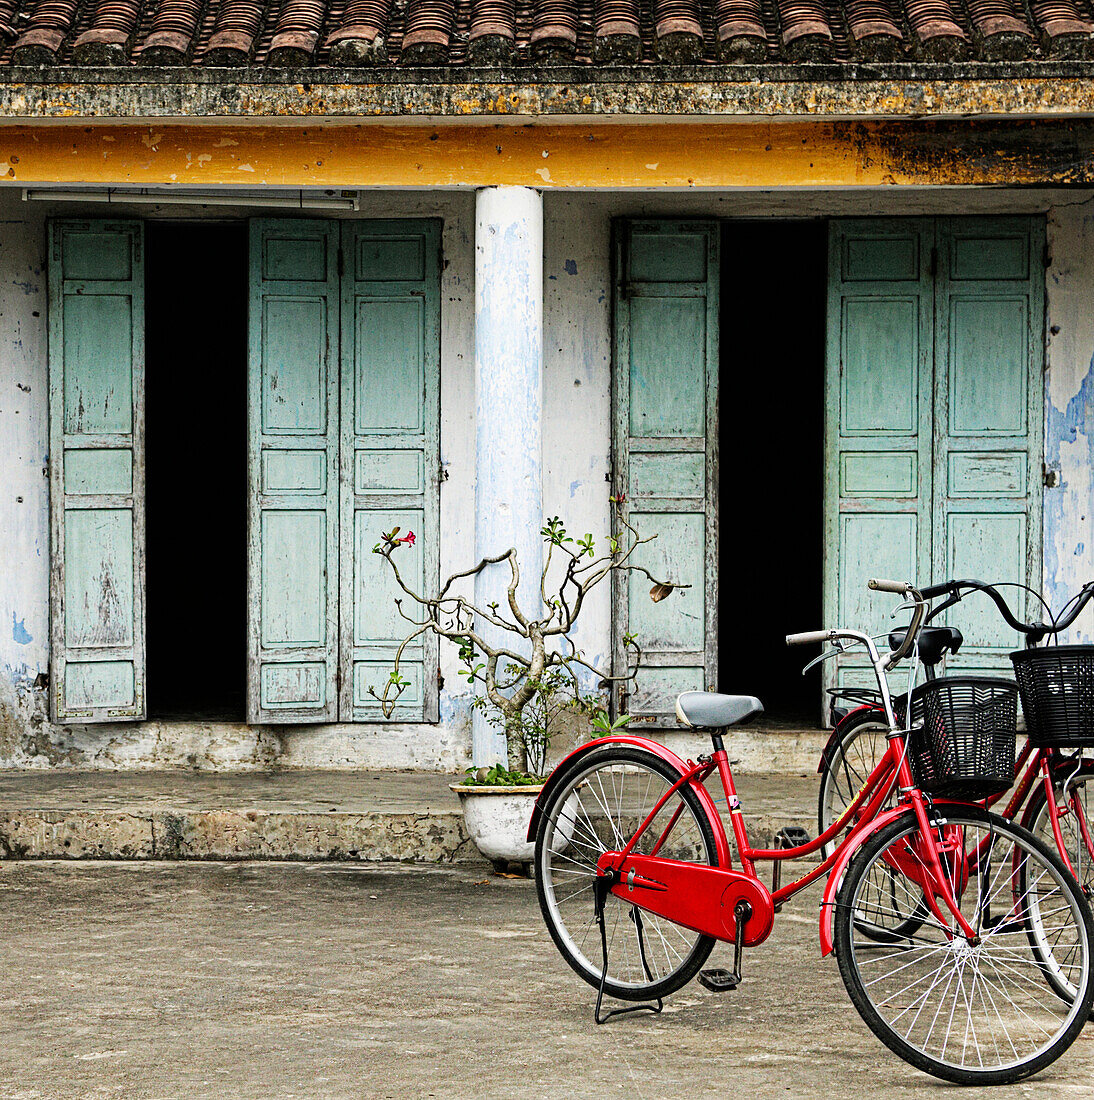 Red Bikes Parked in Front of a Weathered Building, Hoi An, Vietnam